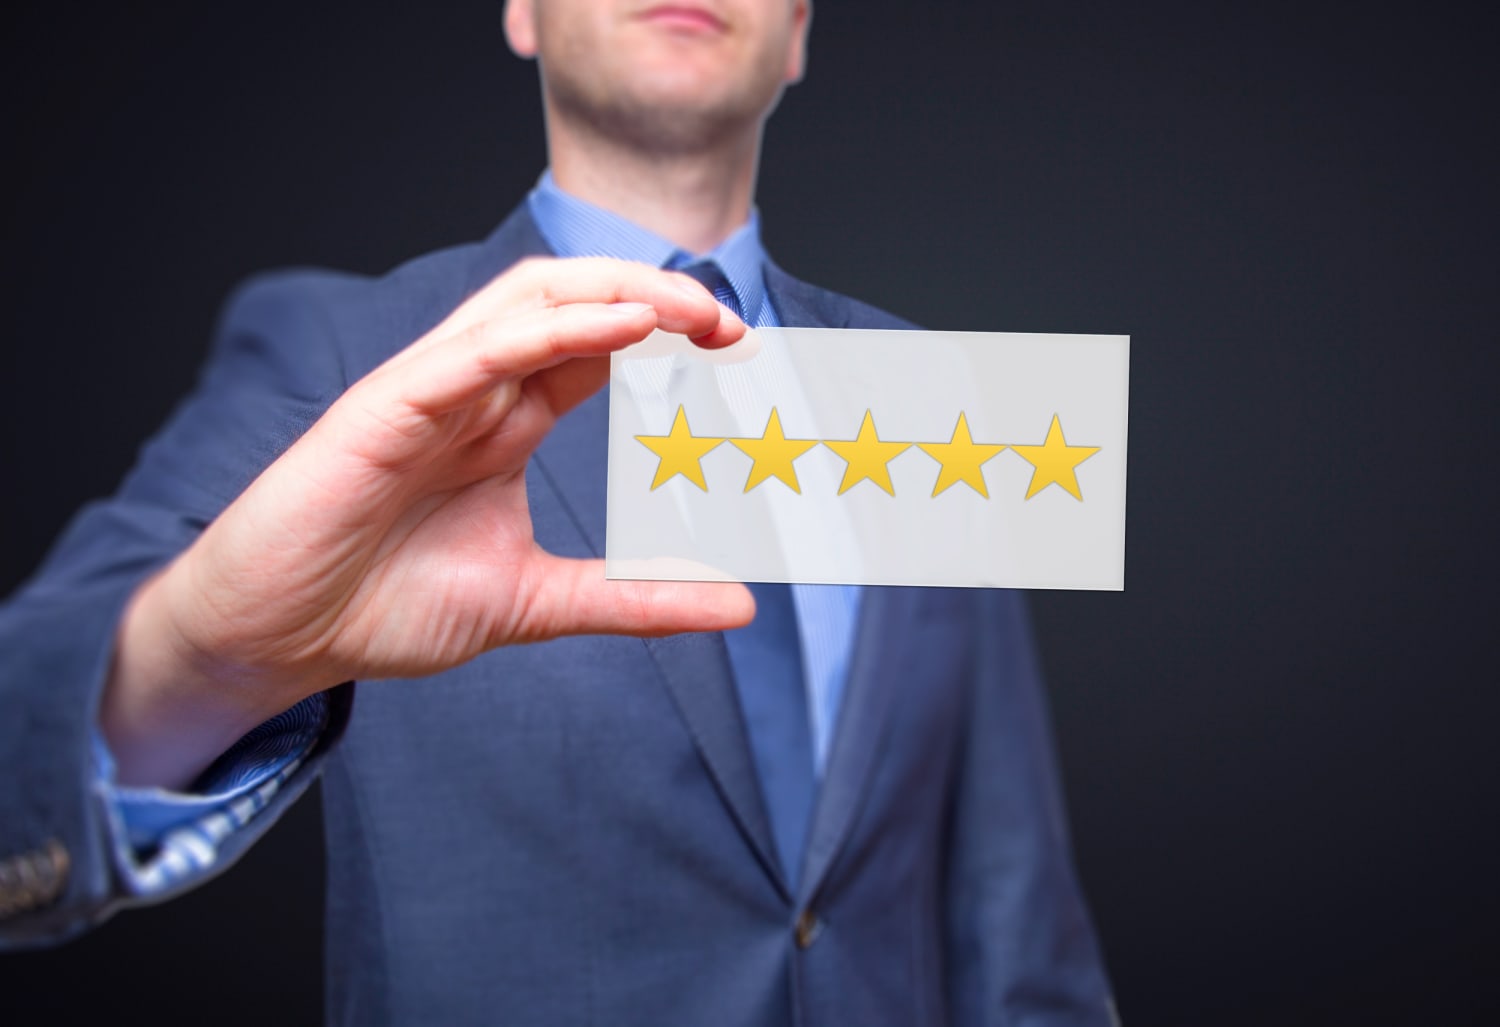 Online reviews: Here's what's behind all those 5 star ratings